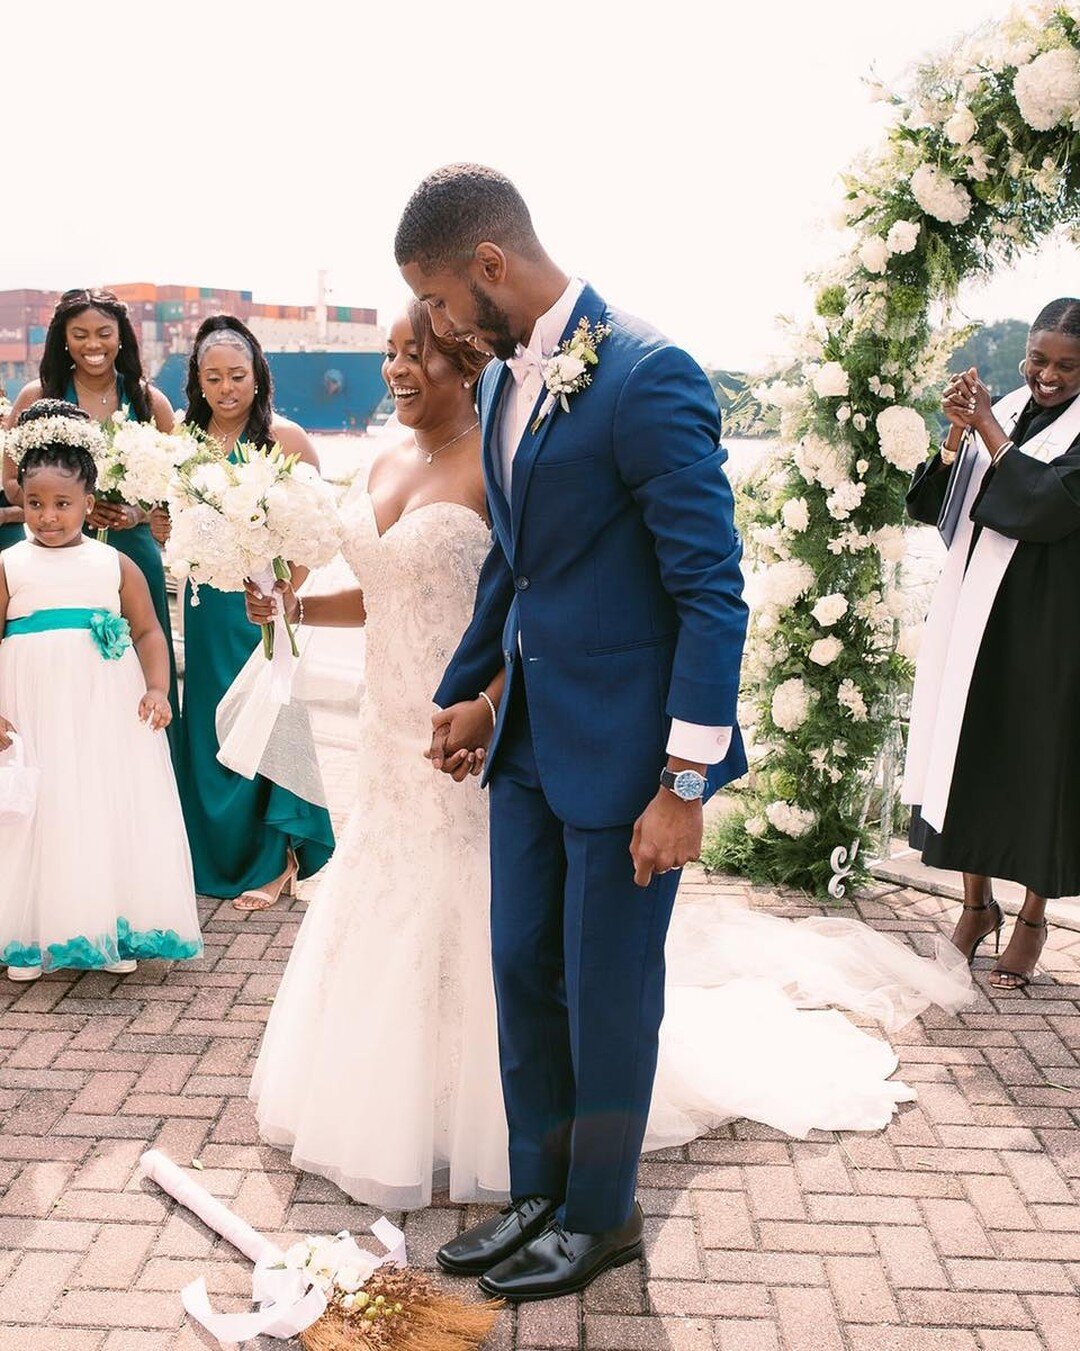 #WednesdayWeddingTraditions 
One of the many wedding traditions is &quot;jumping  broom.&quot; Following the exchange of vows, the newlyweds hold hands and jump over a broom to seal their union.

Venue: The Westin Savannah Harbor Golf Resort &amp; Sp